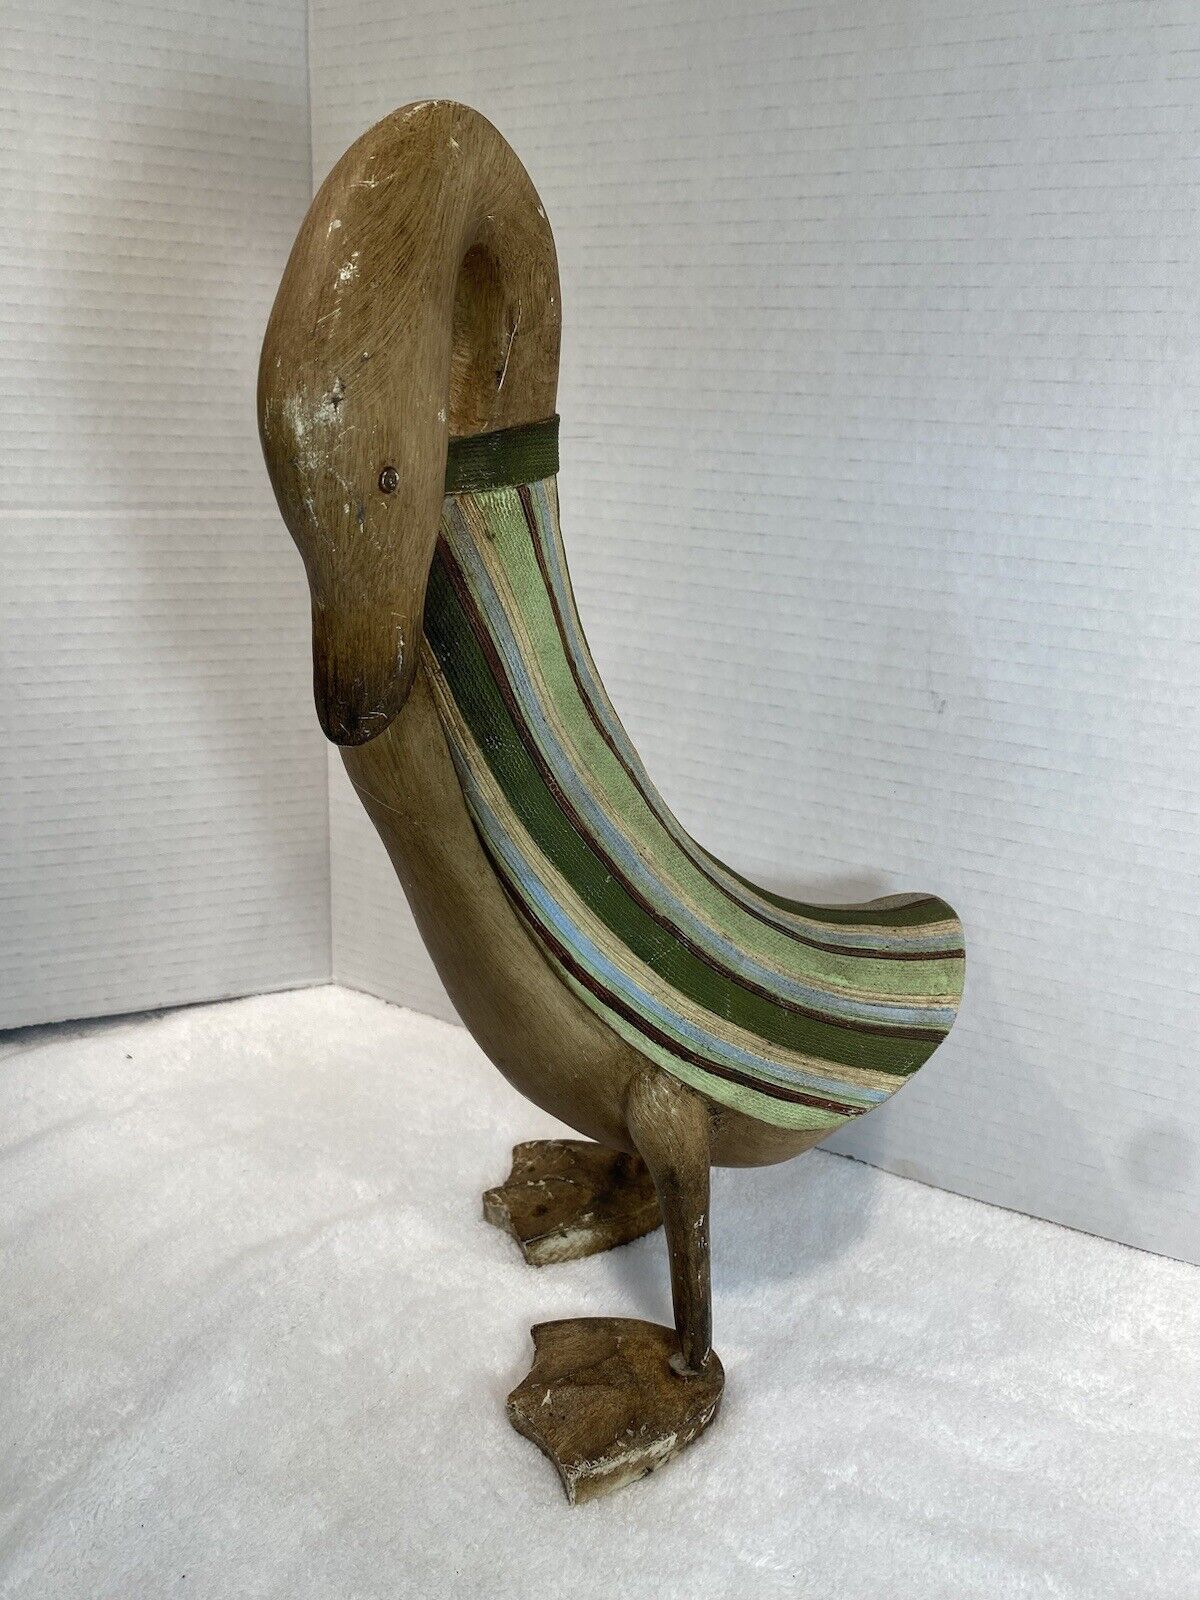 Carved Wood Duck With Overcoat On